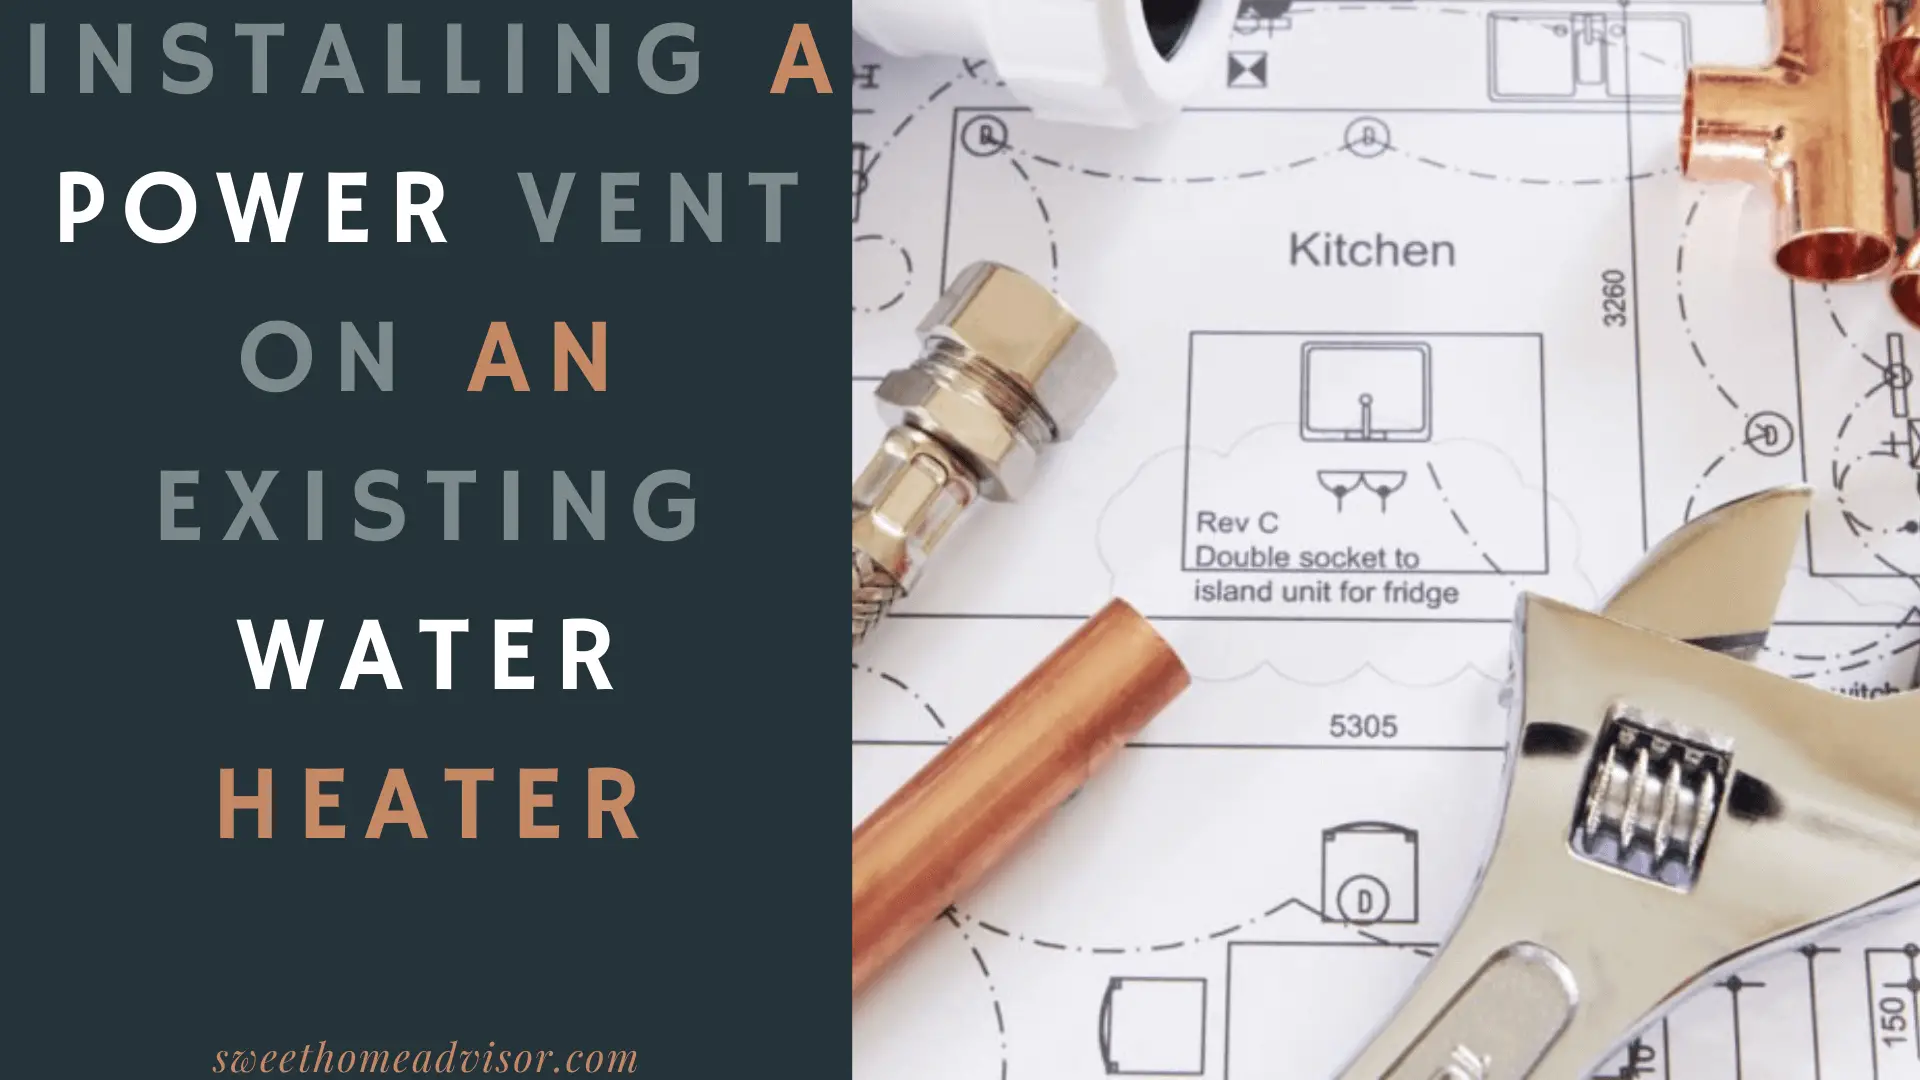 Installing a Power Vent on an Existing Water Heater